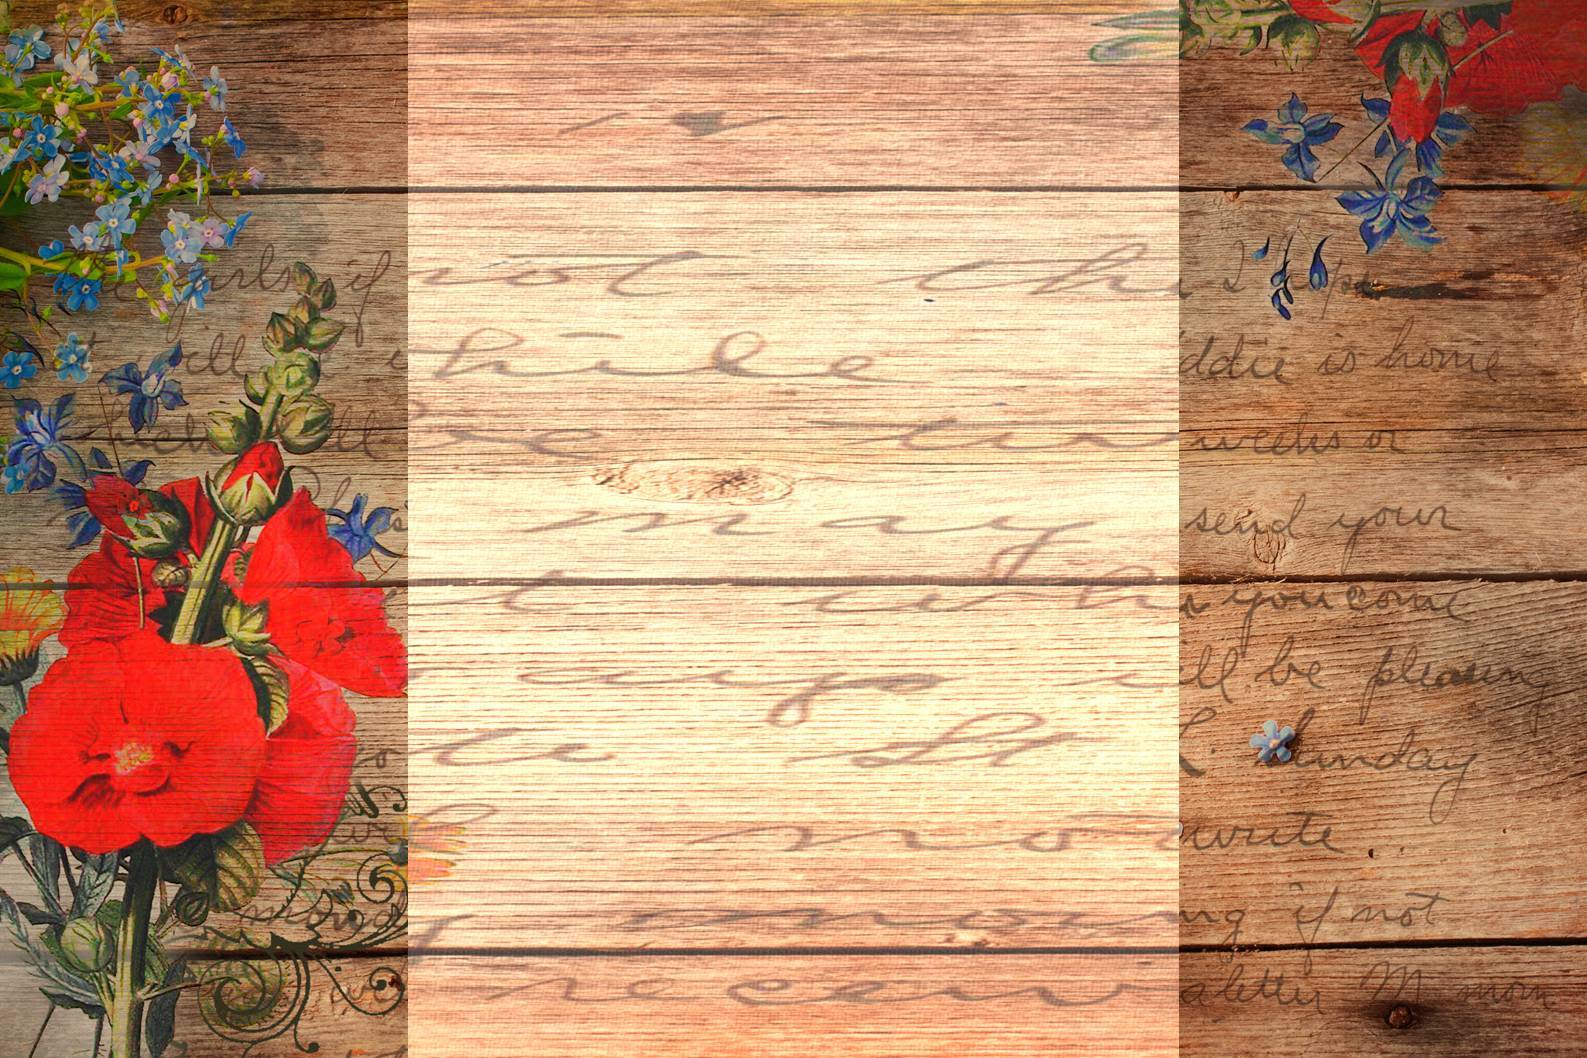 Beauty wood with flowers backgrounds